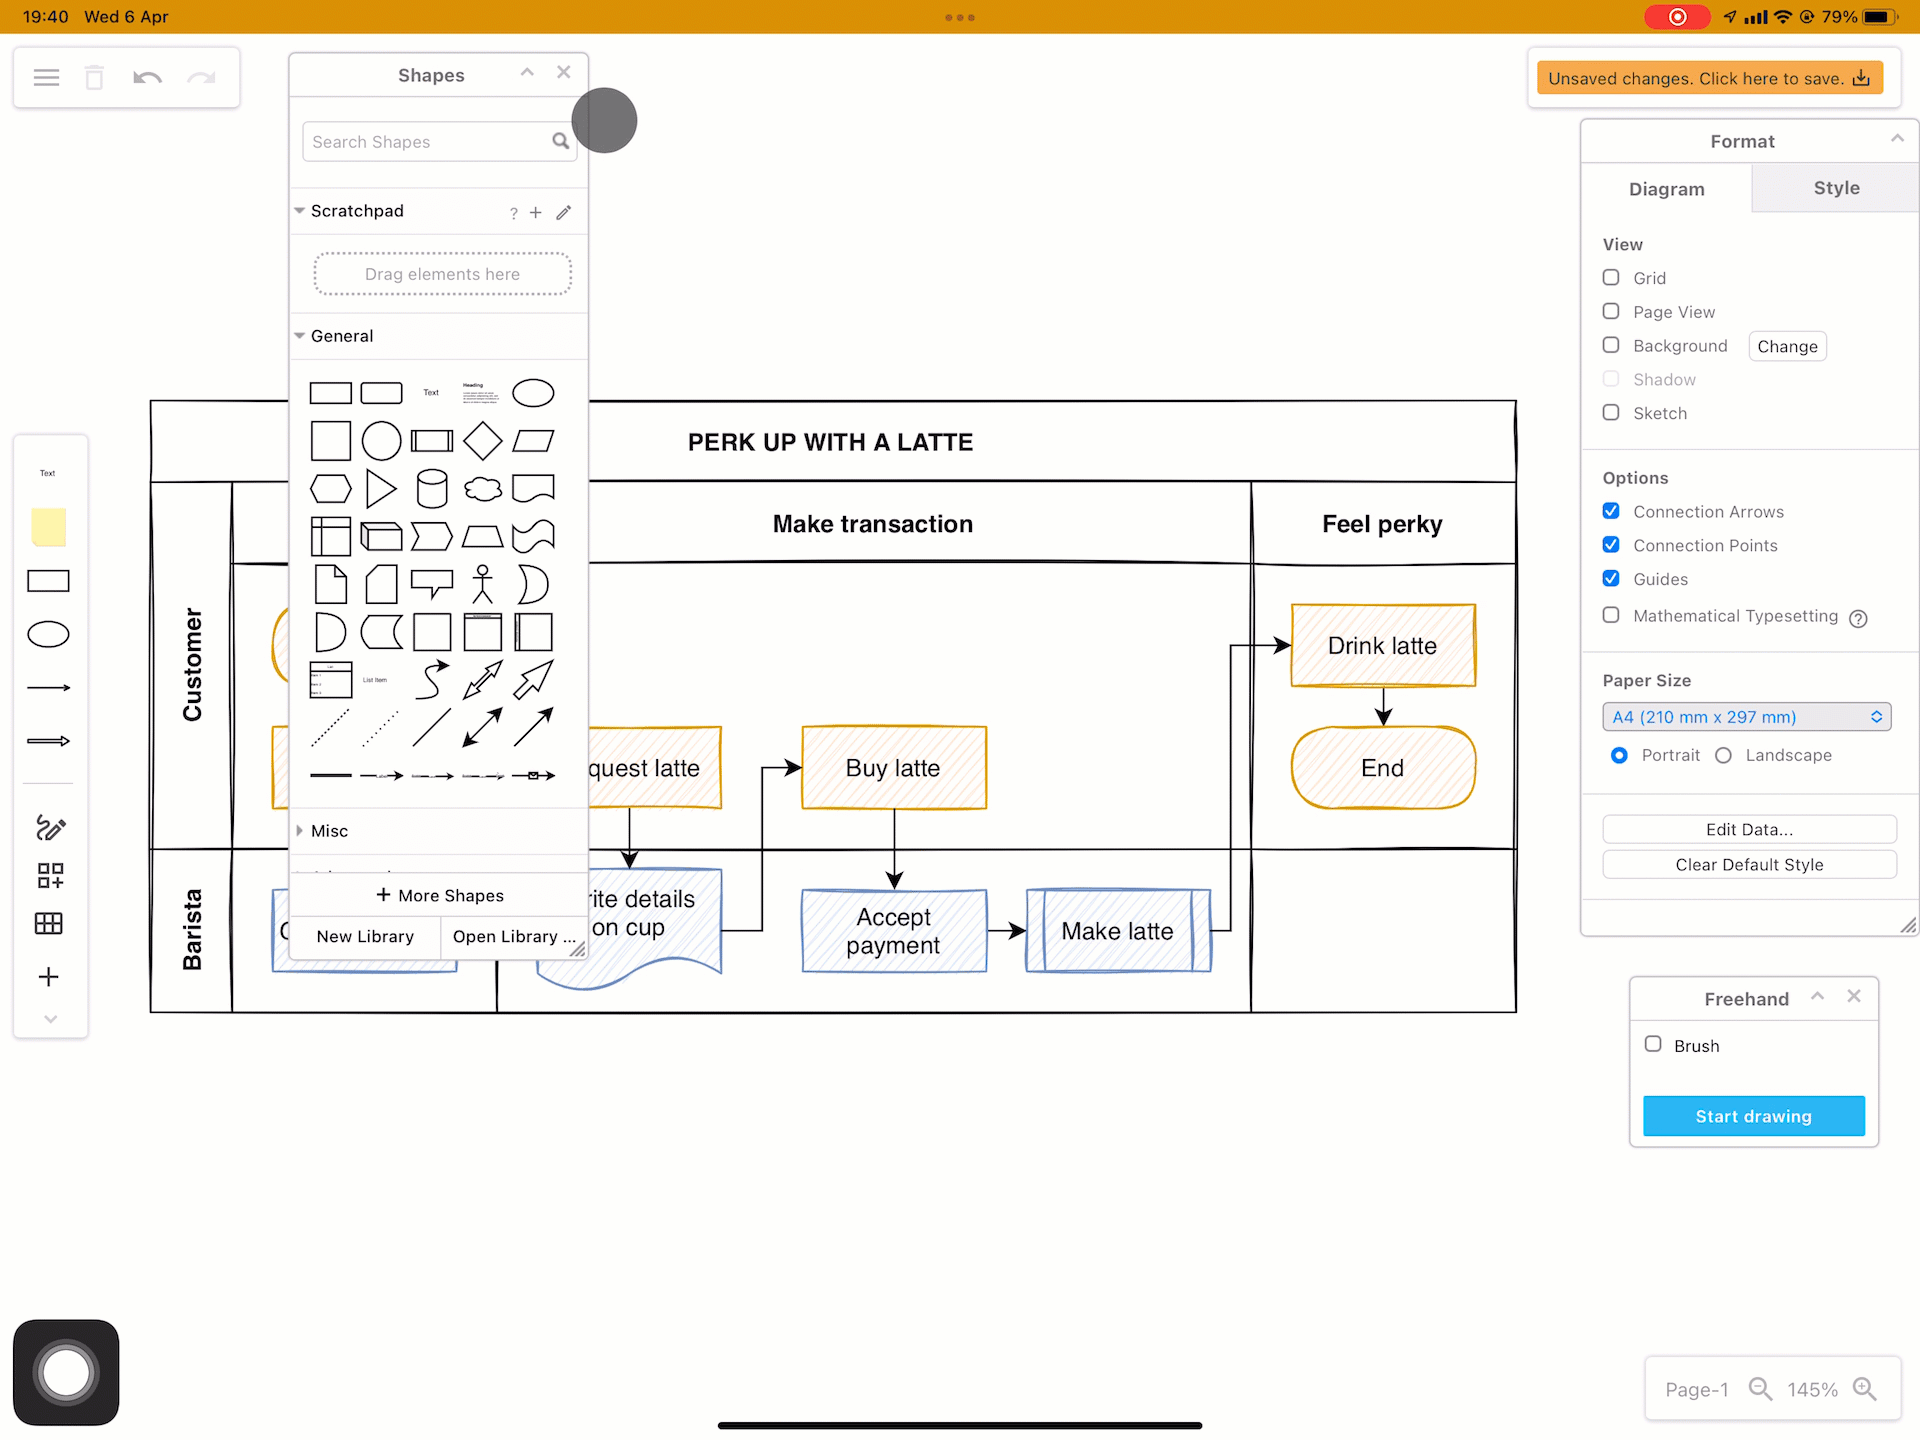 Move the floating panels around the drawing canvas and minimise them for more space when using diagrams.net on a tablet